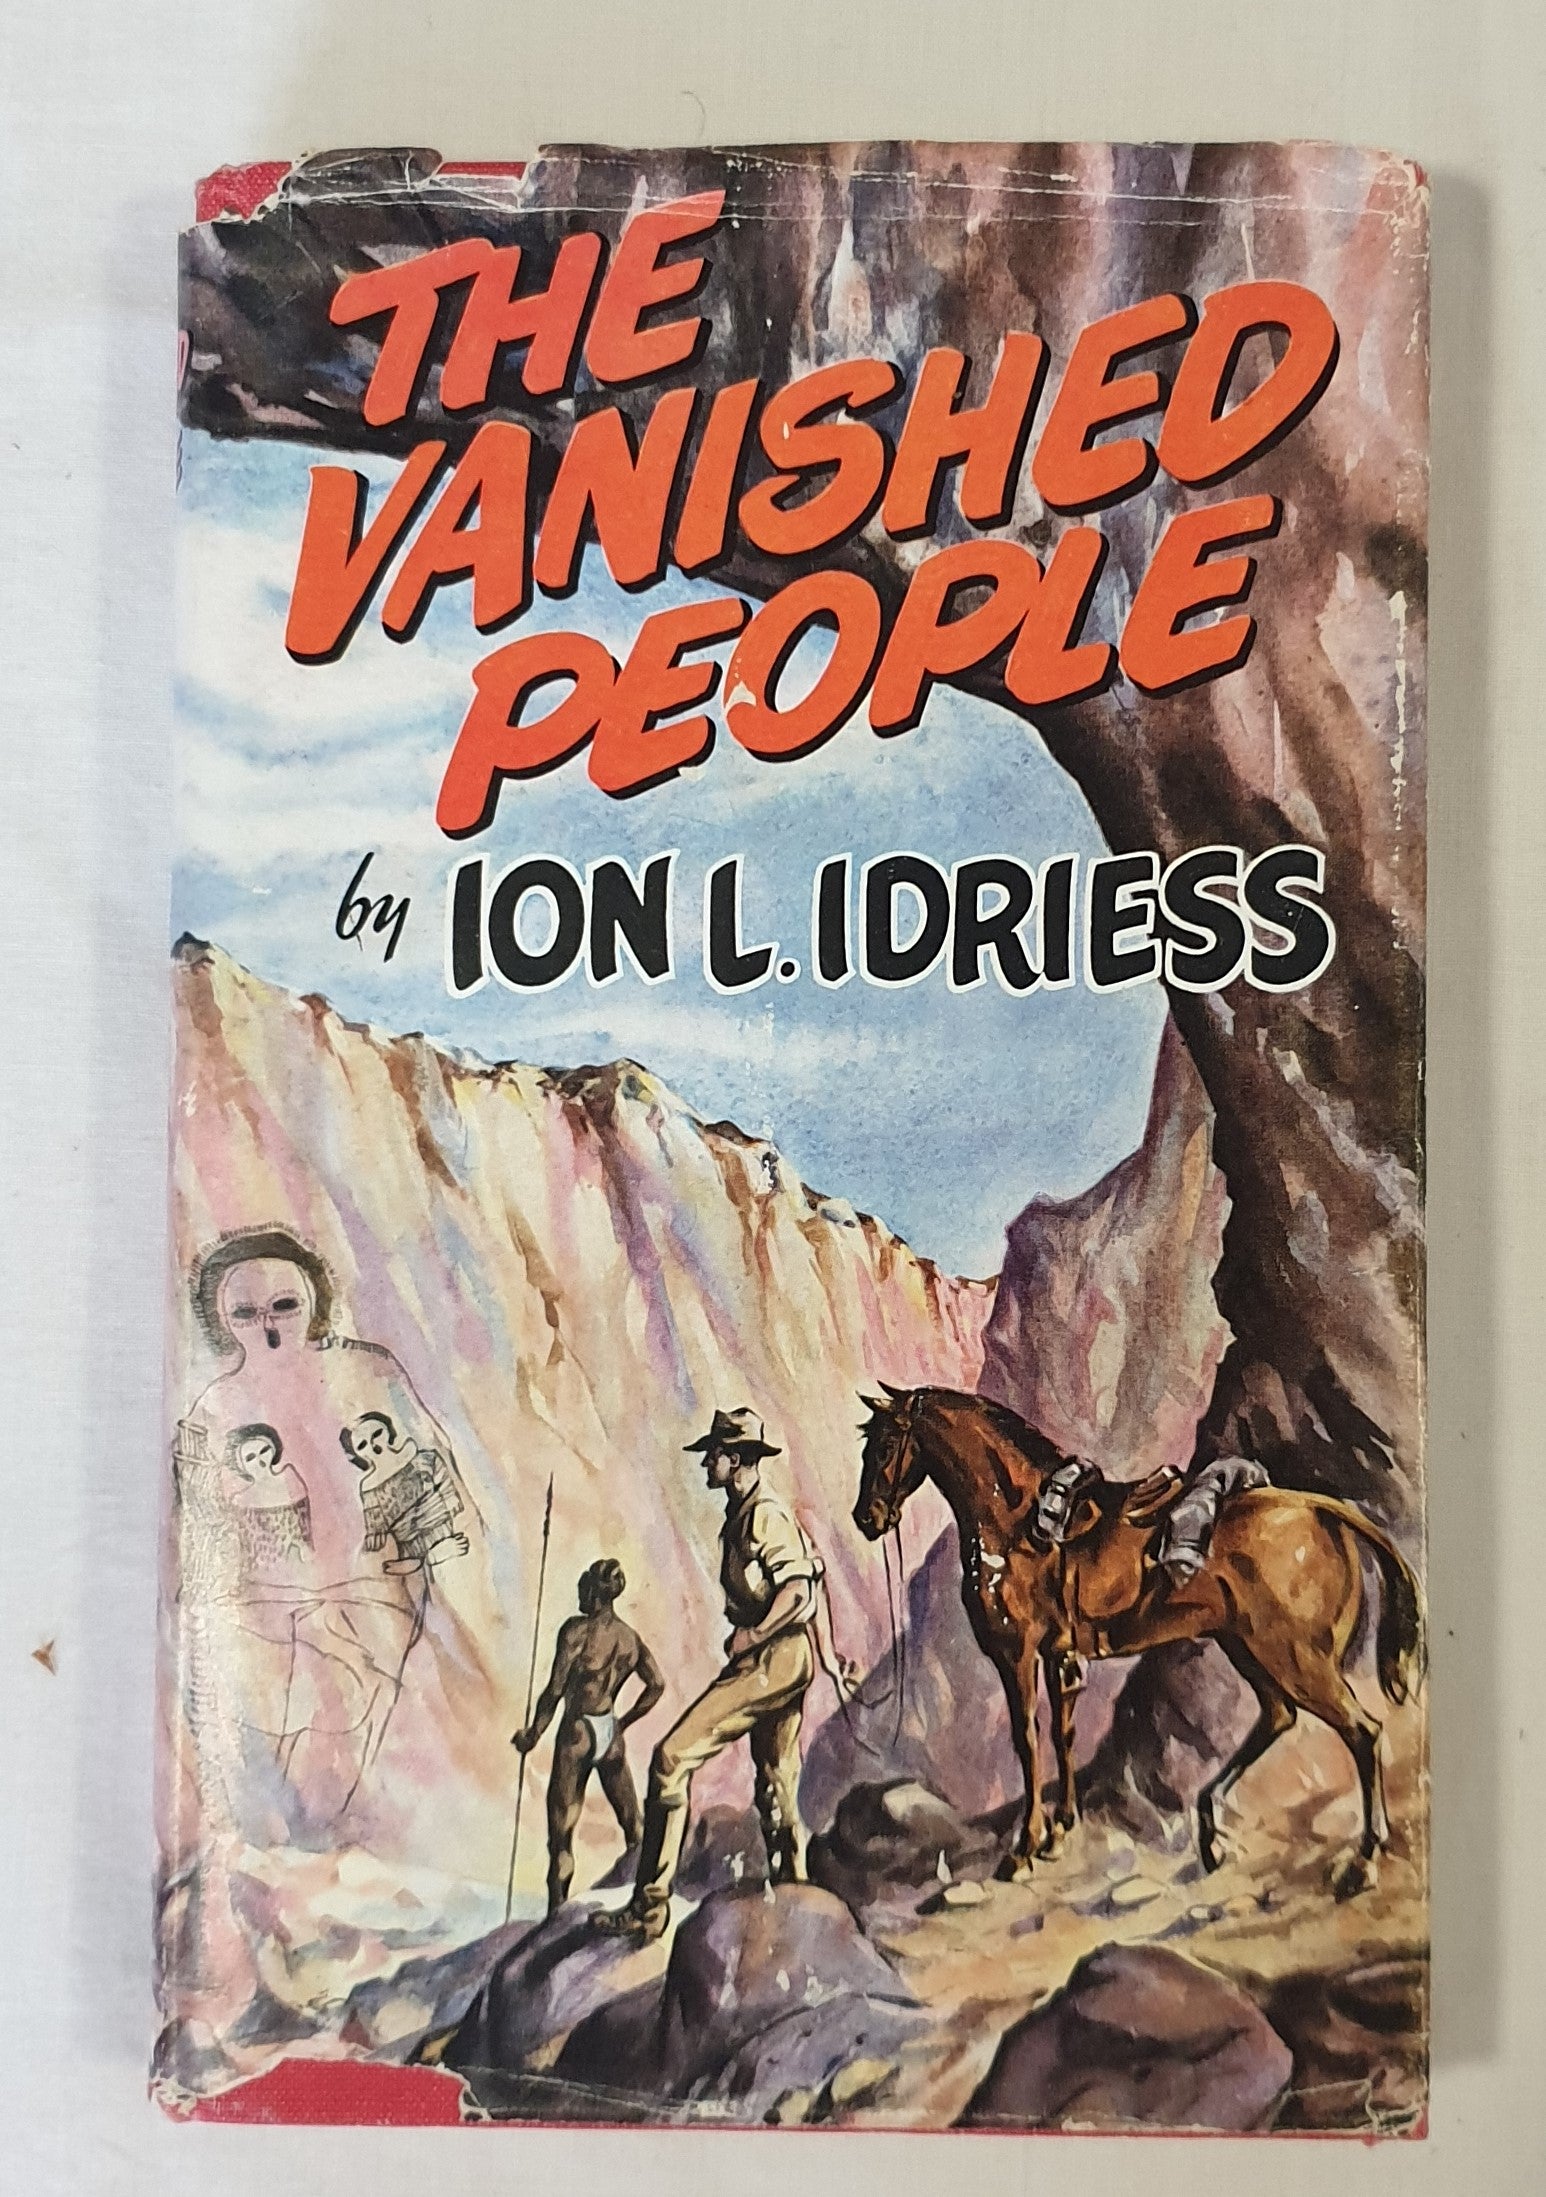 The Vanished People by Ion L. Idriess